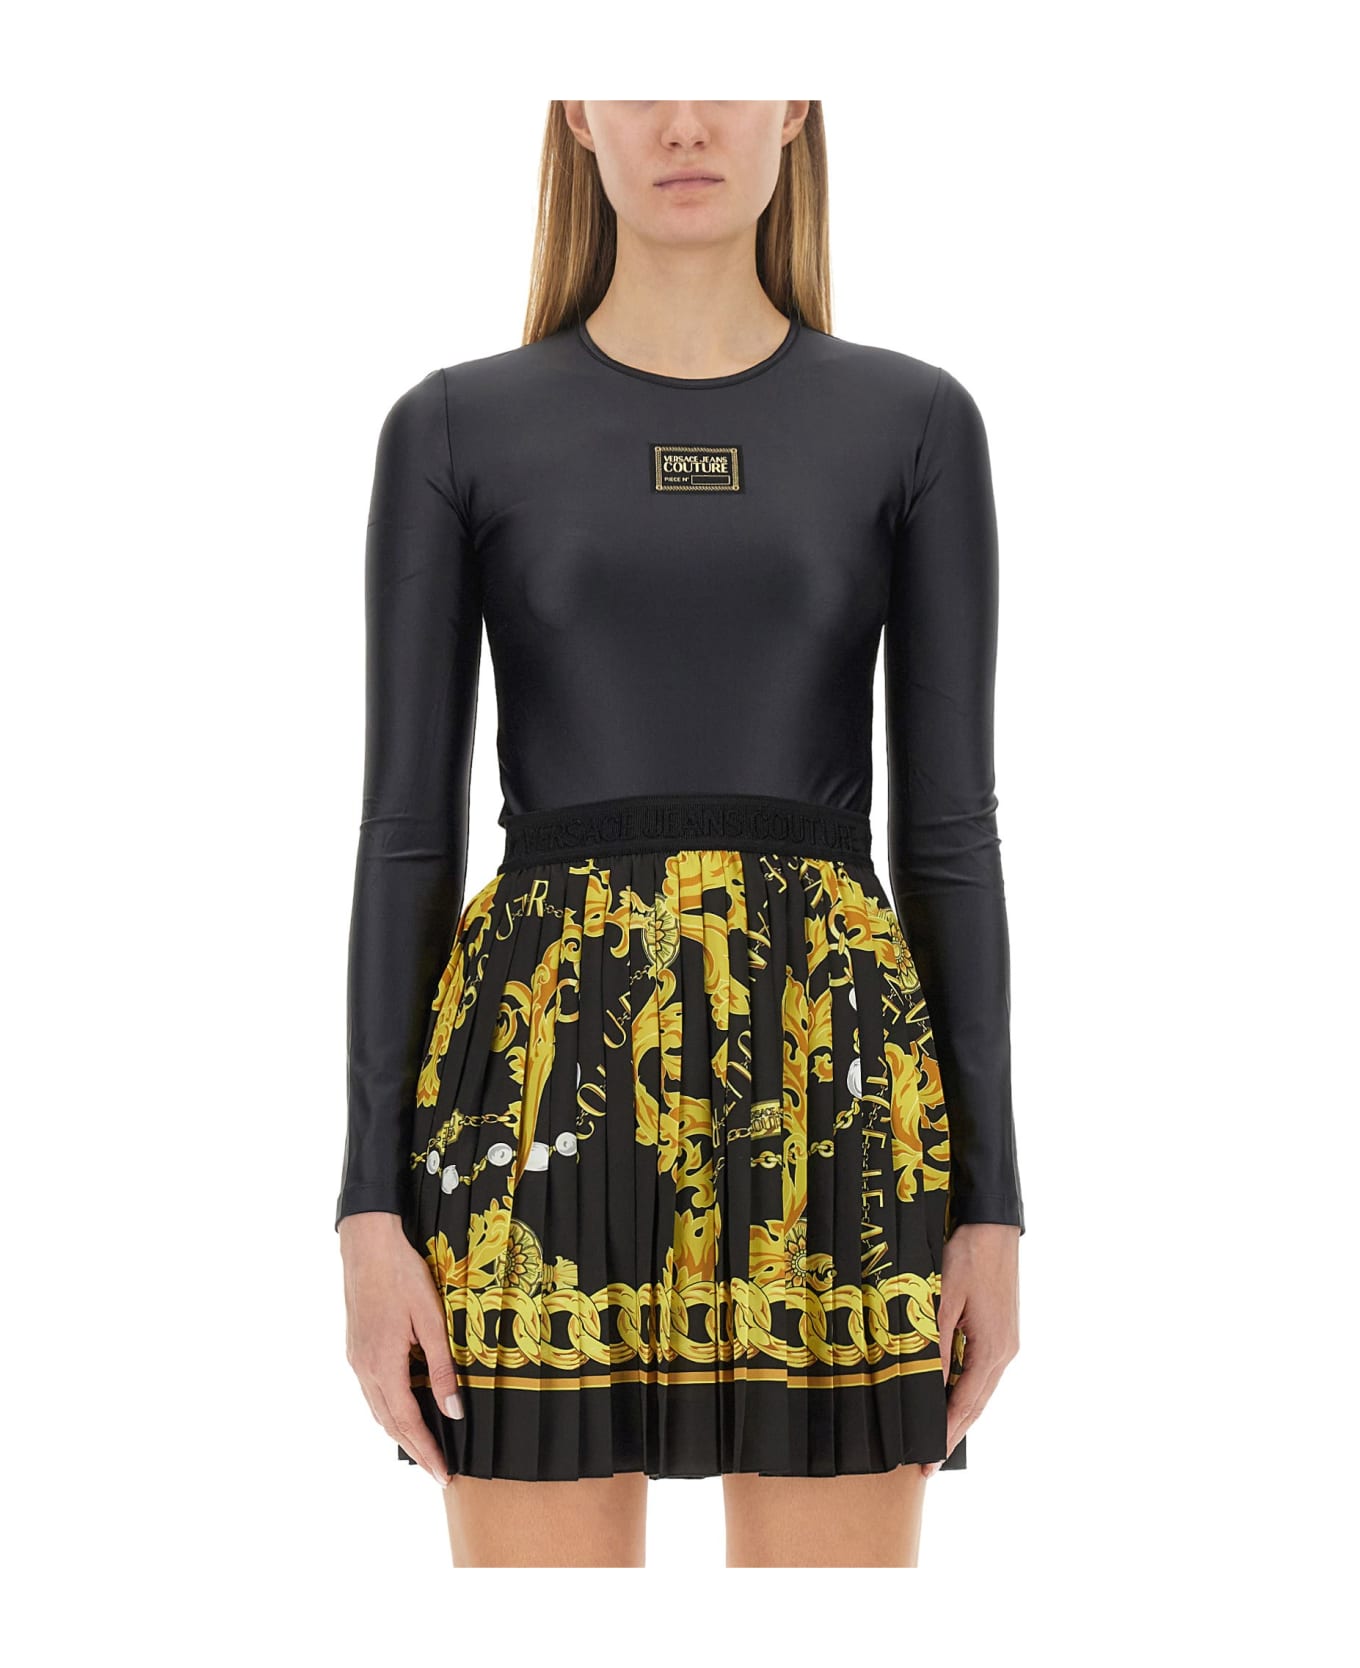 Versace Jeans Couture Top - 899